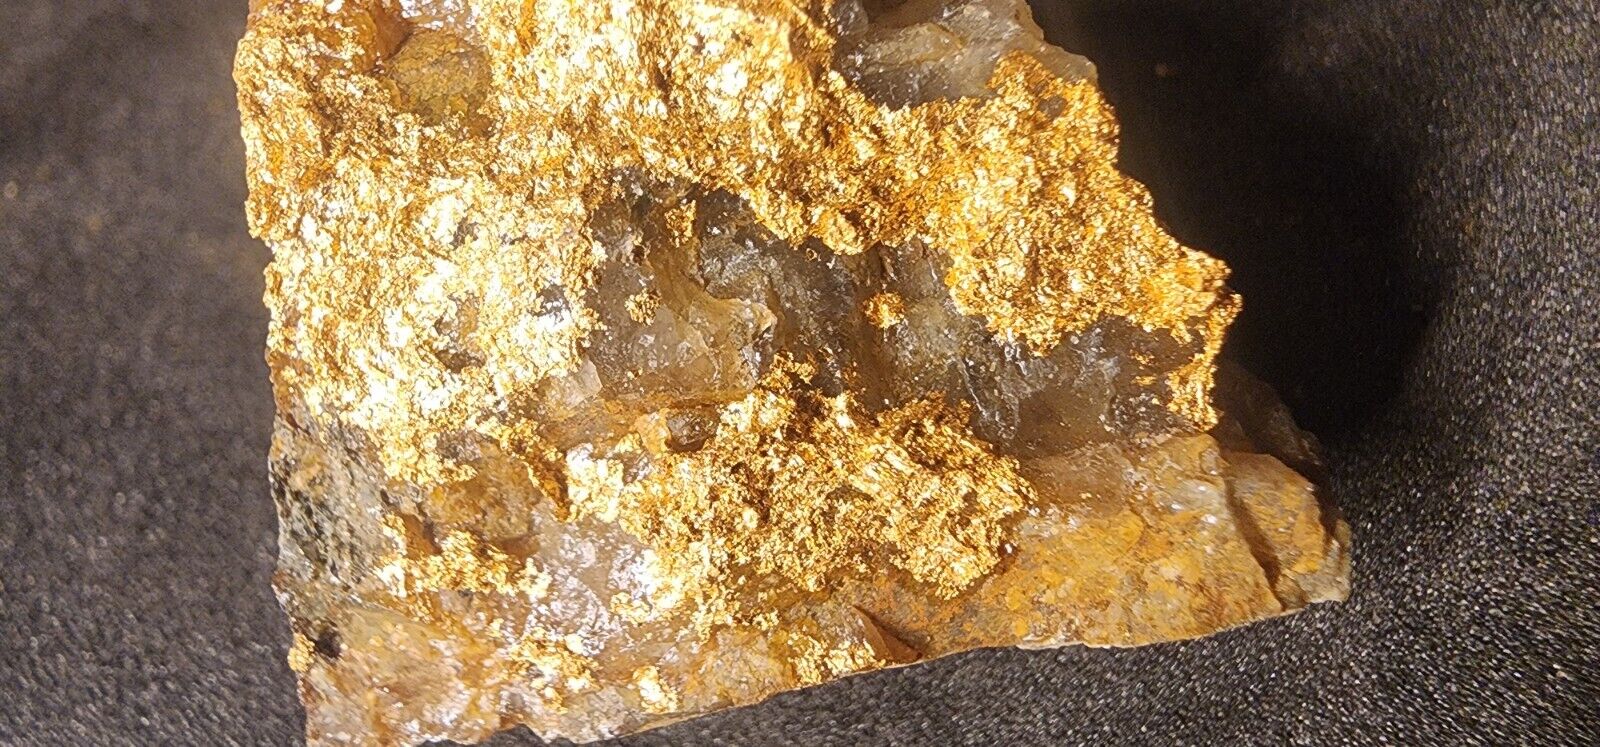 Gold Ore Specimen 18.6g From Ontario 2603 Was $175 Exceptional